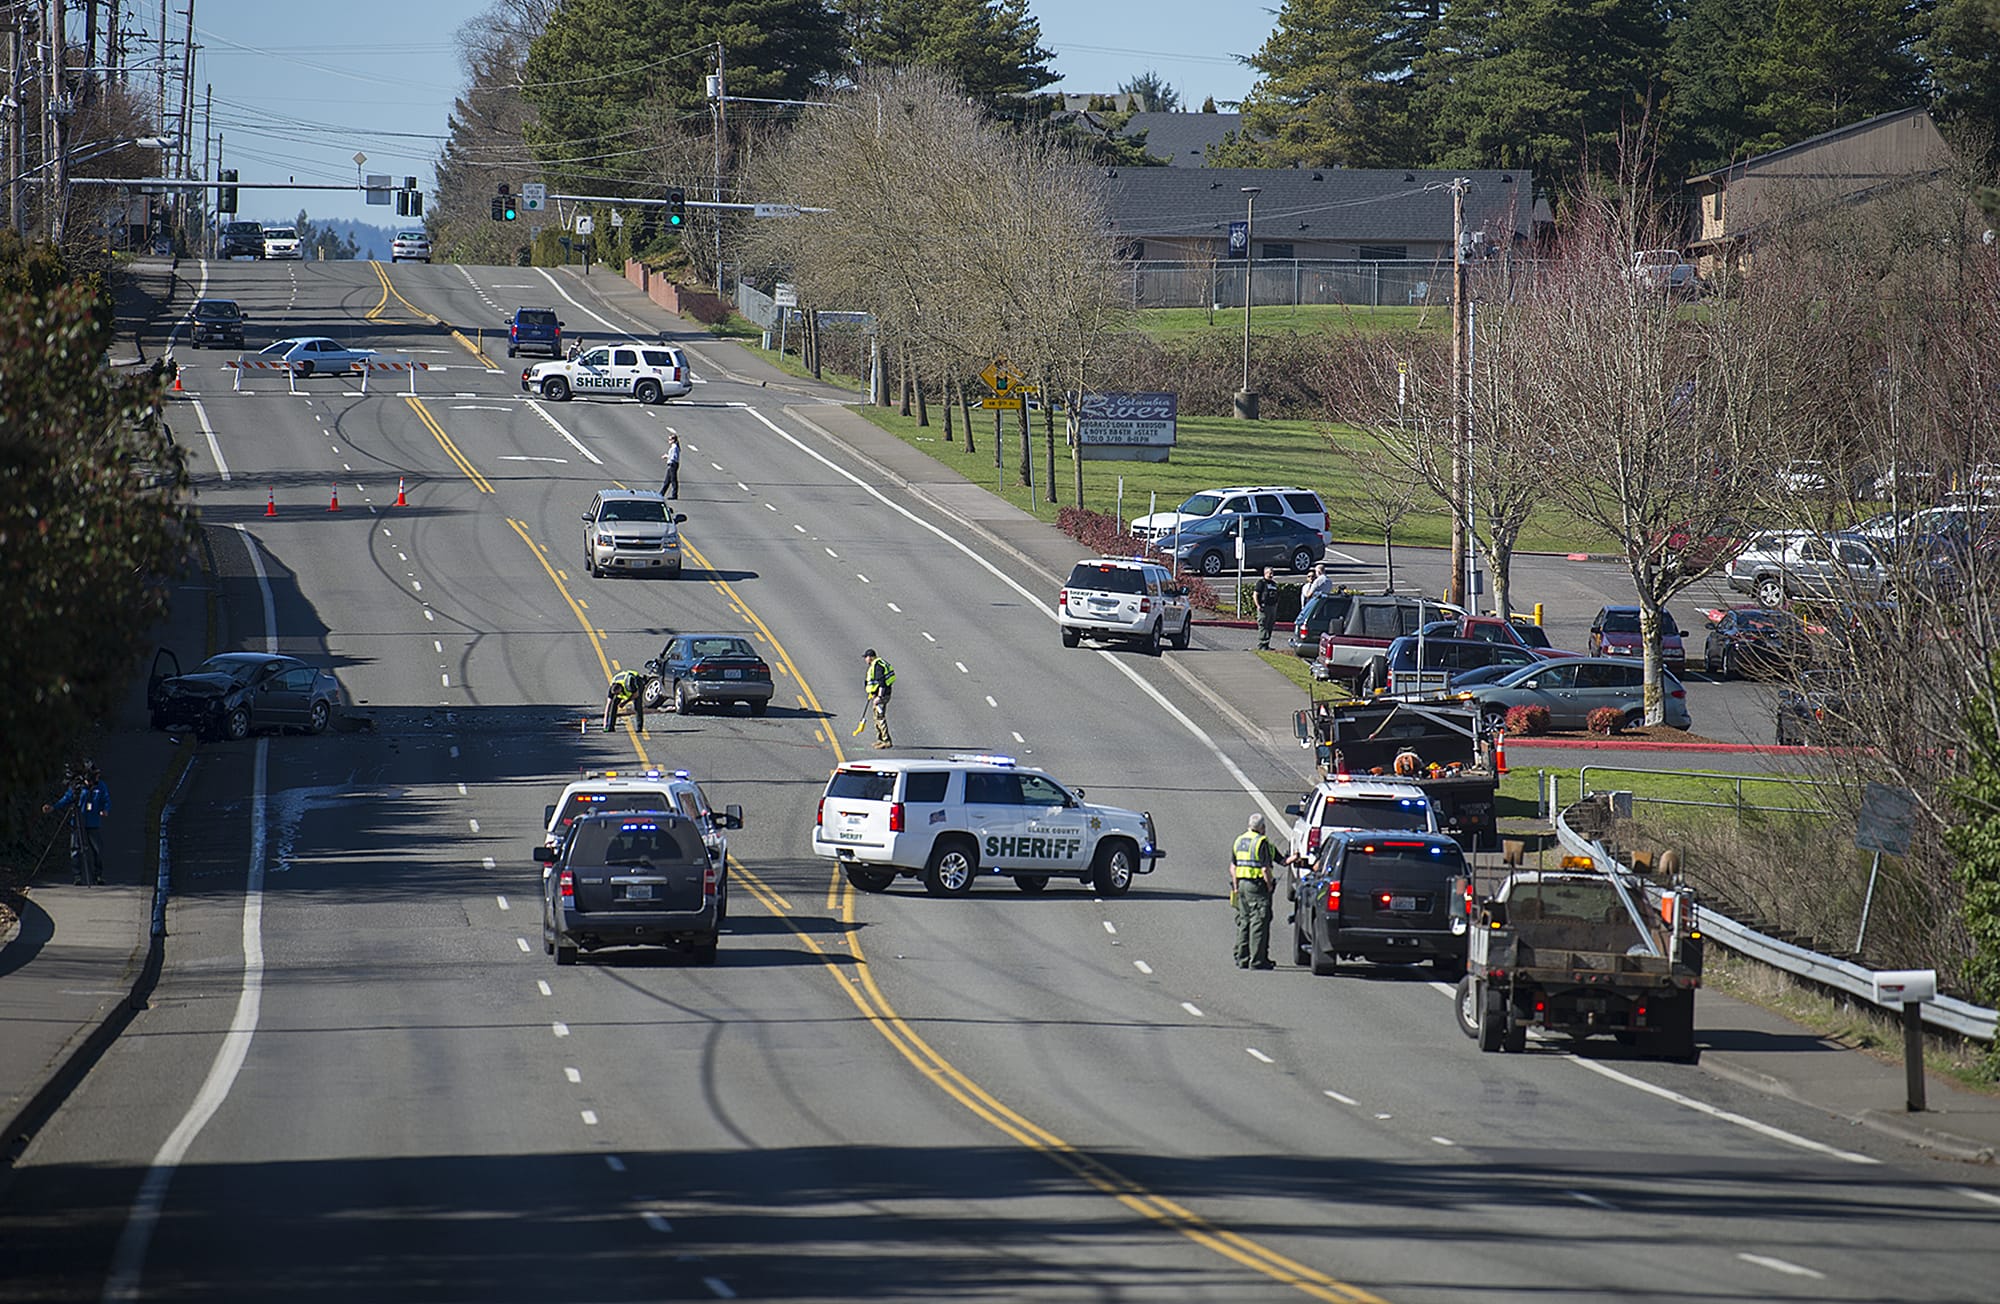 Officials investigate a two-car collision involving a Volkswagen Jetta, left, and a Subaru Legacy, center, near Columbia River High School on Tuesday morning, March 6, 2018. One person was confirmed dead in the crash and police route traffic around the scene on 99th Street.